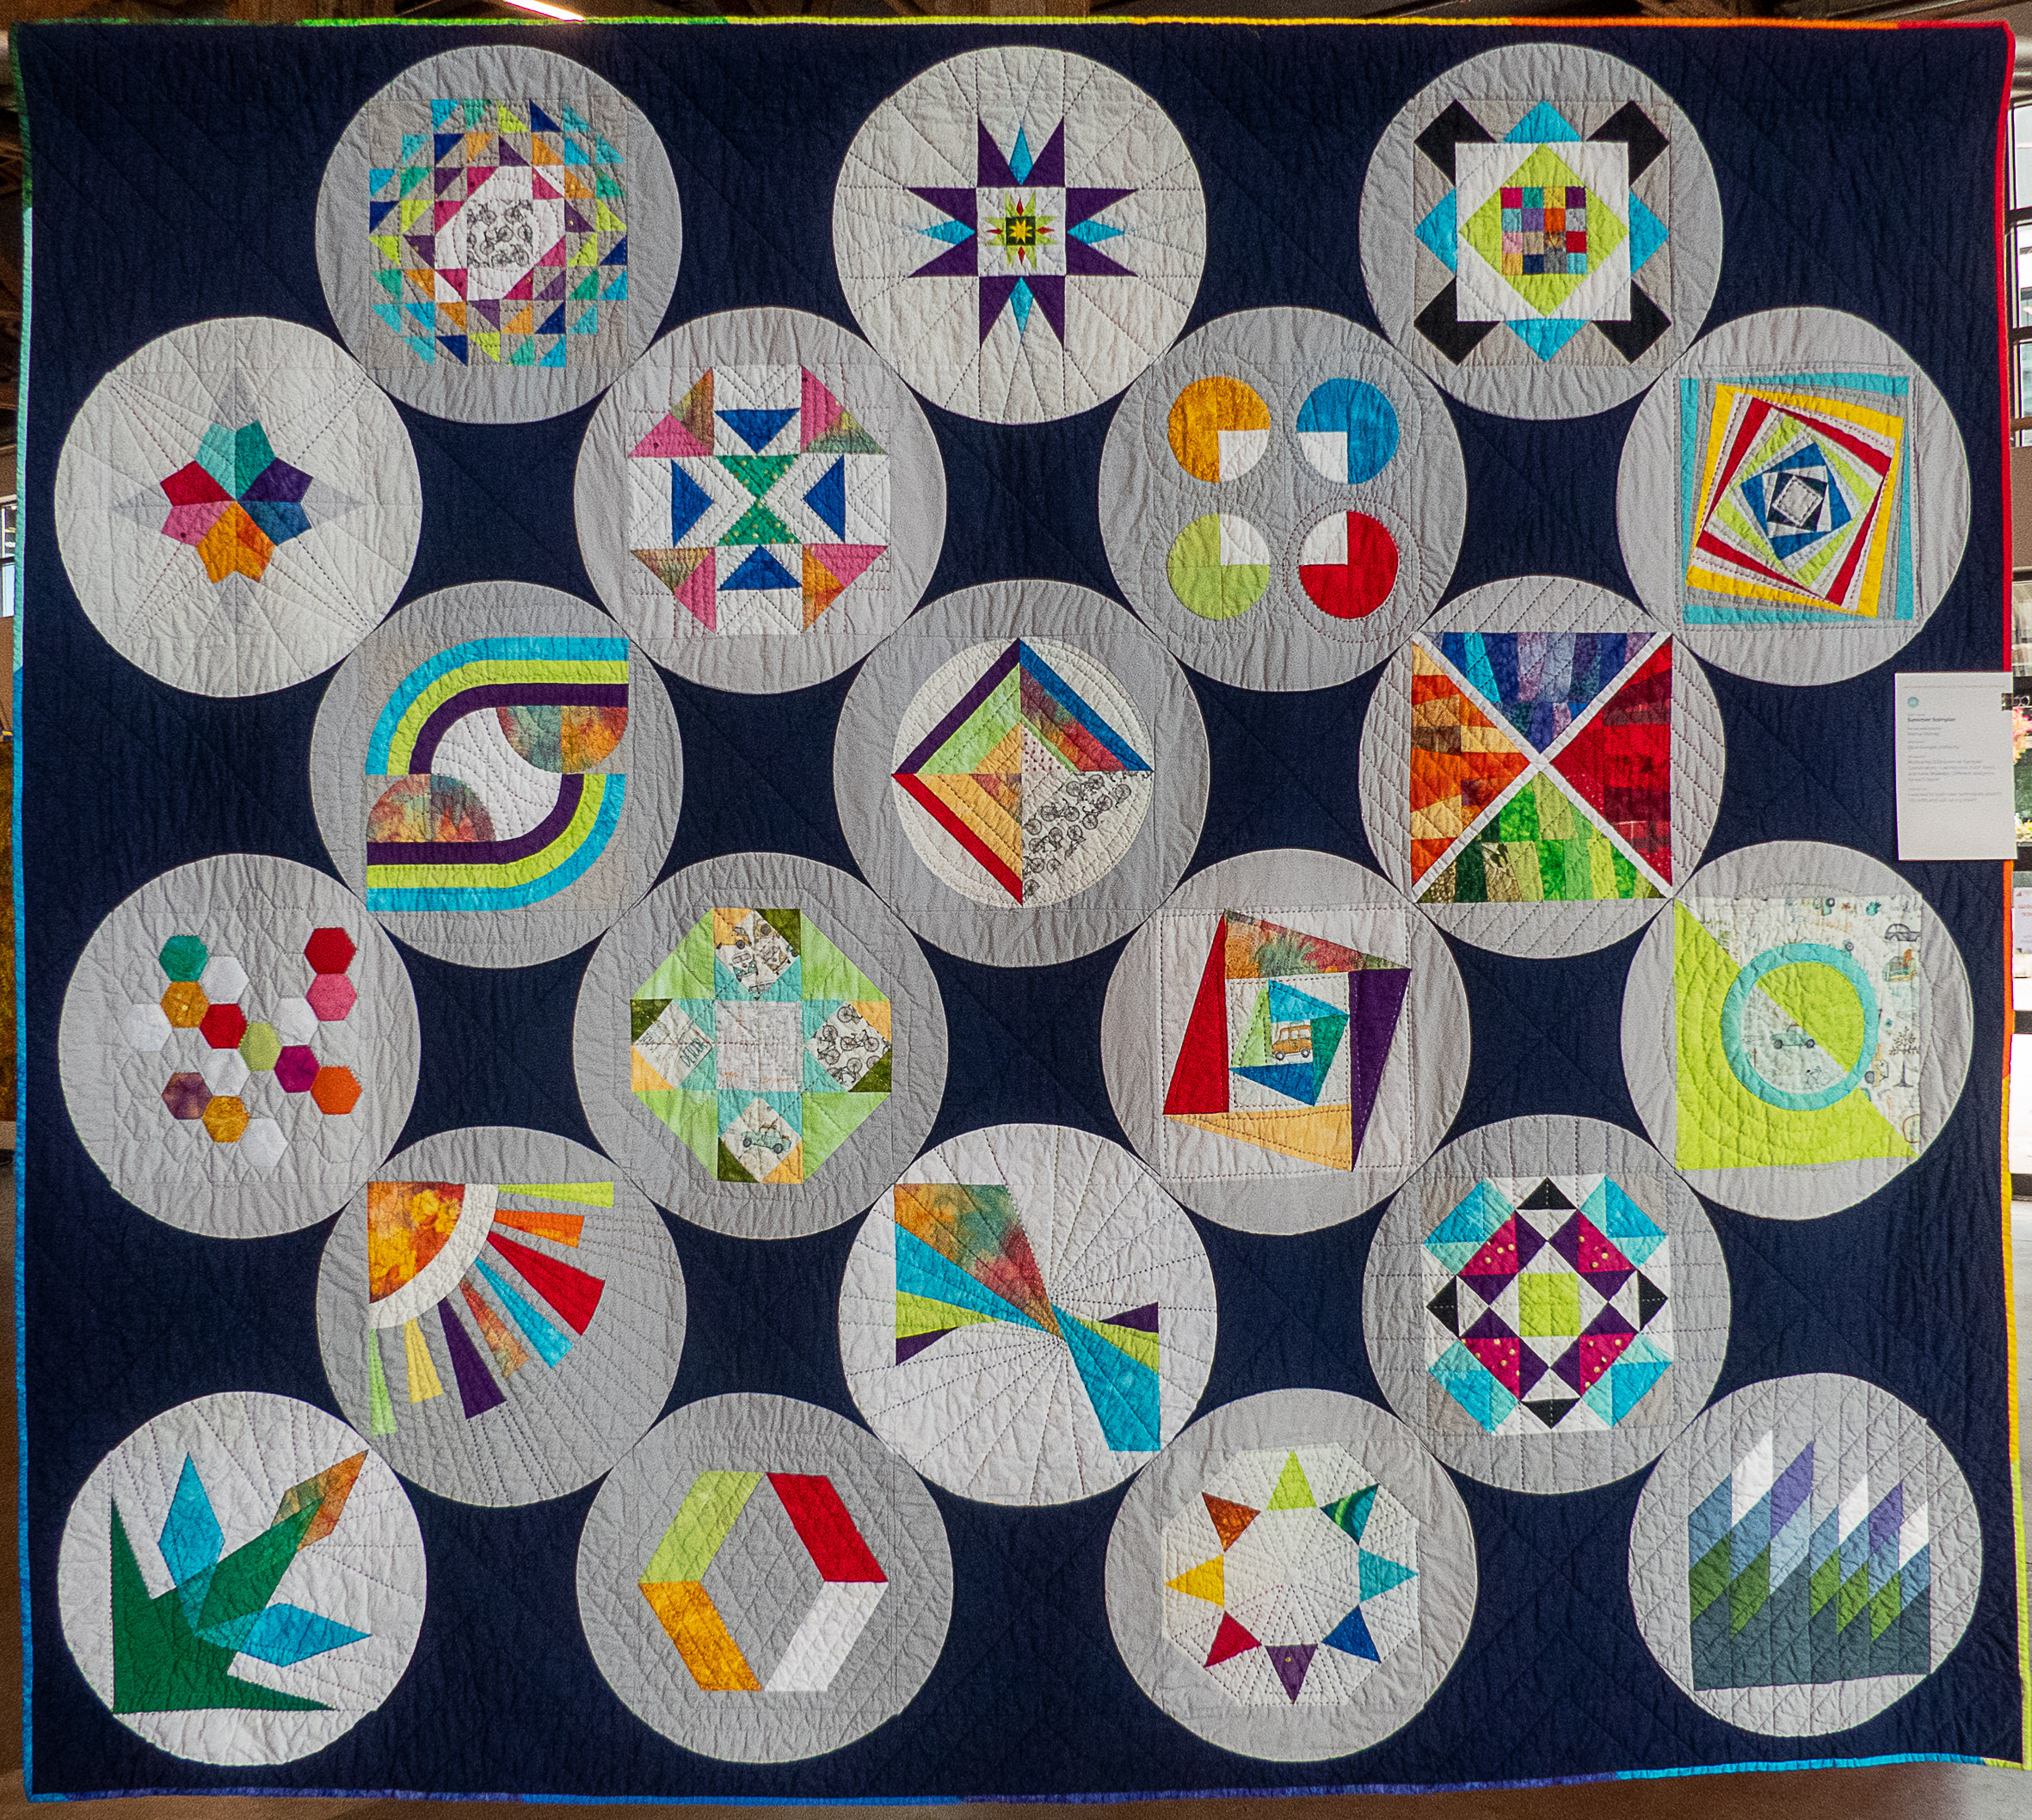 modern quilt with circle shapes containing geometric shapes